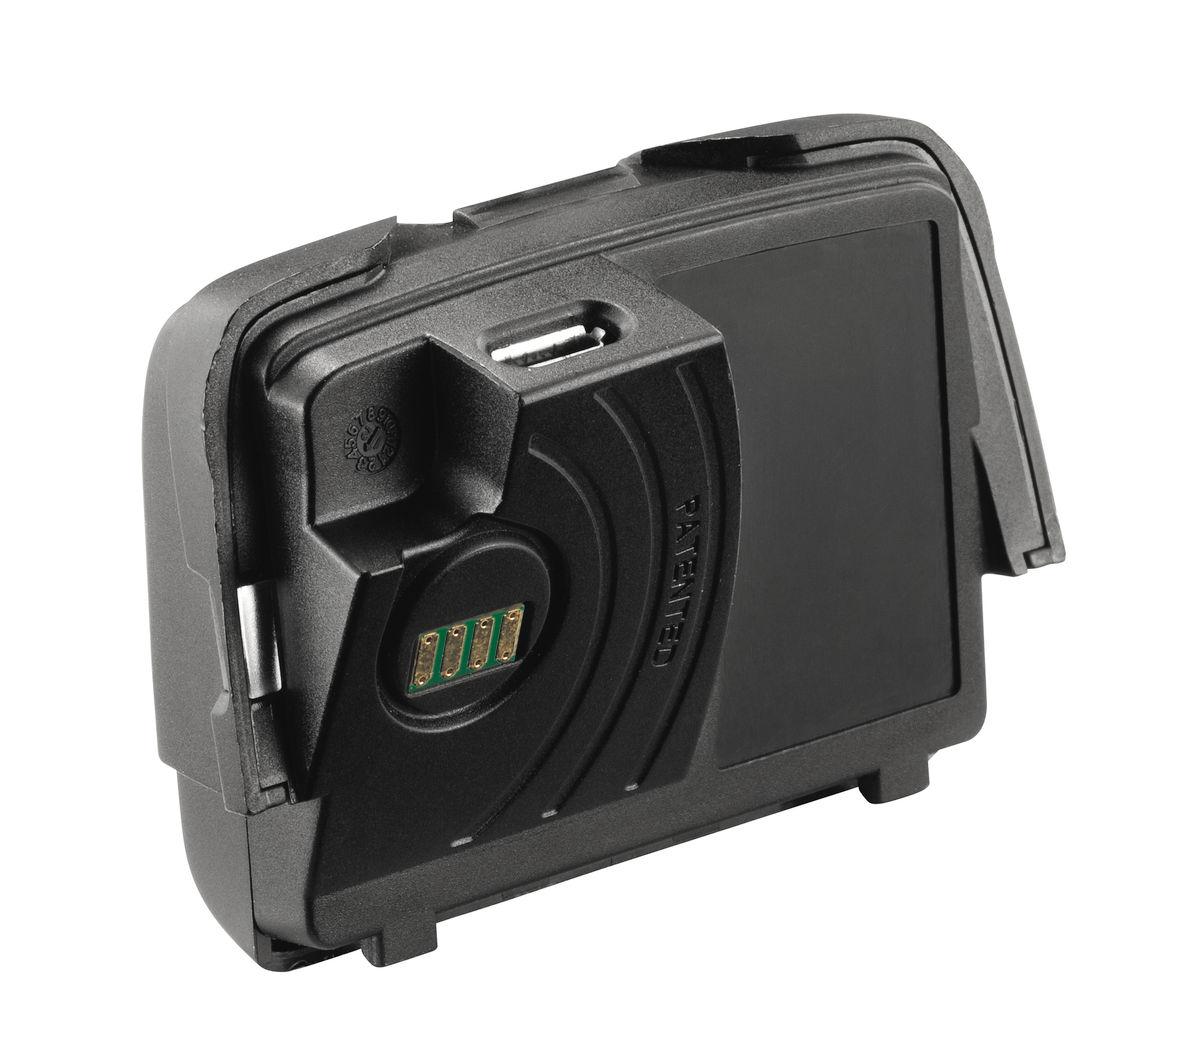  Petzl ACCU CORE - Rechargeable Battery Compatible With